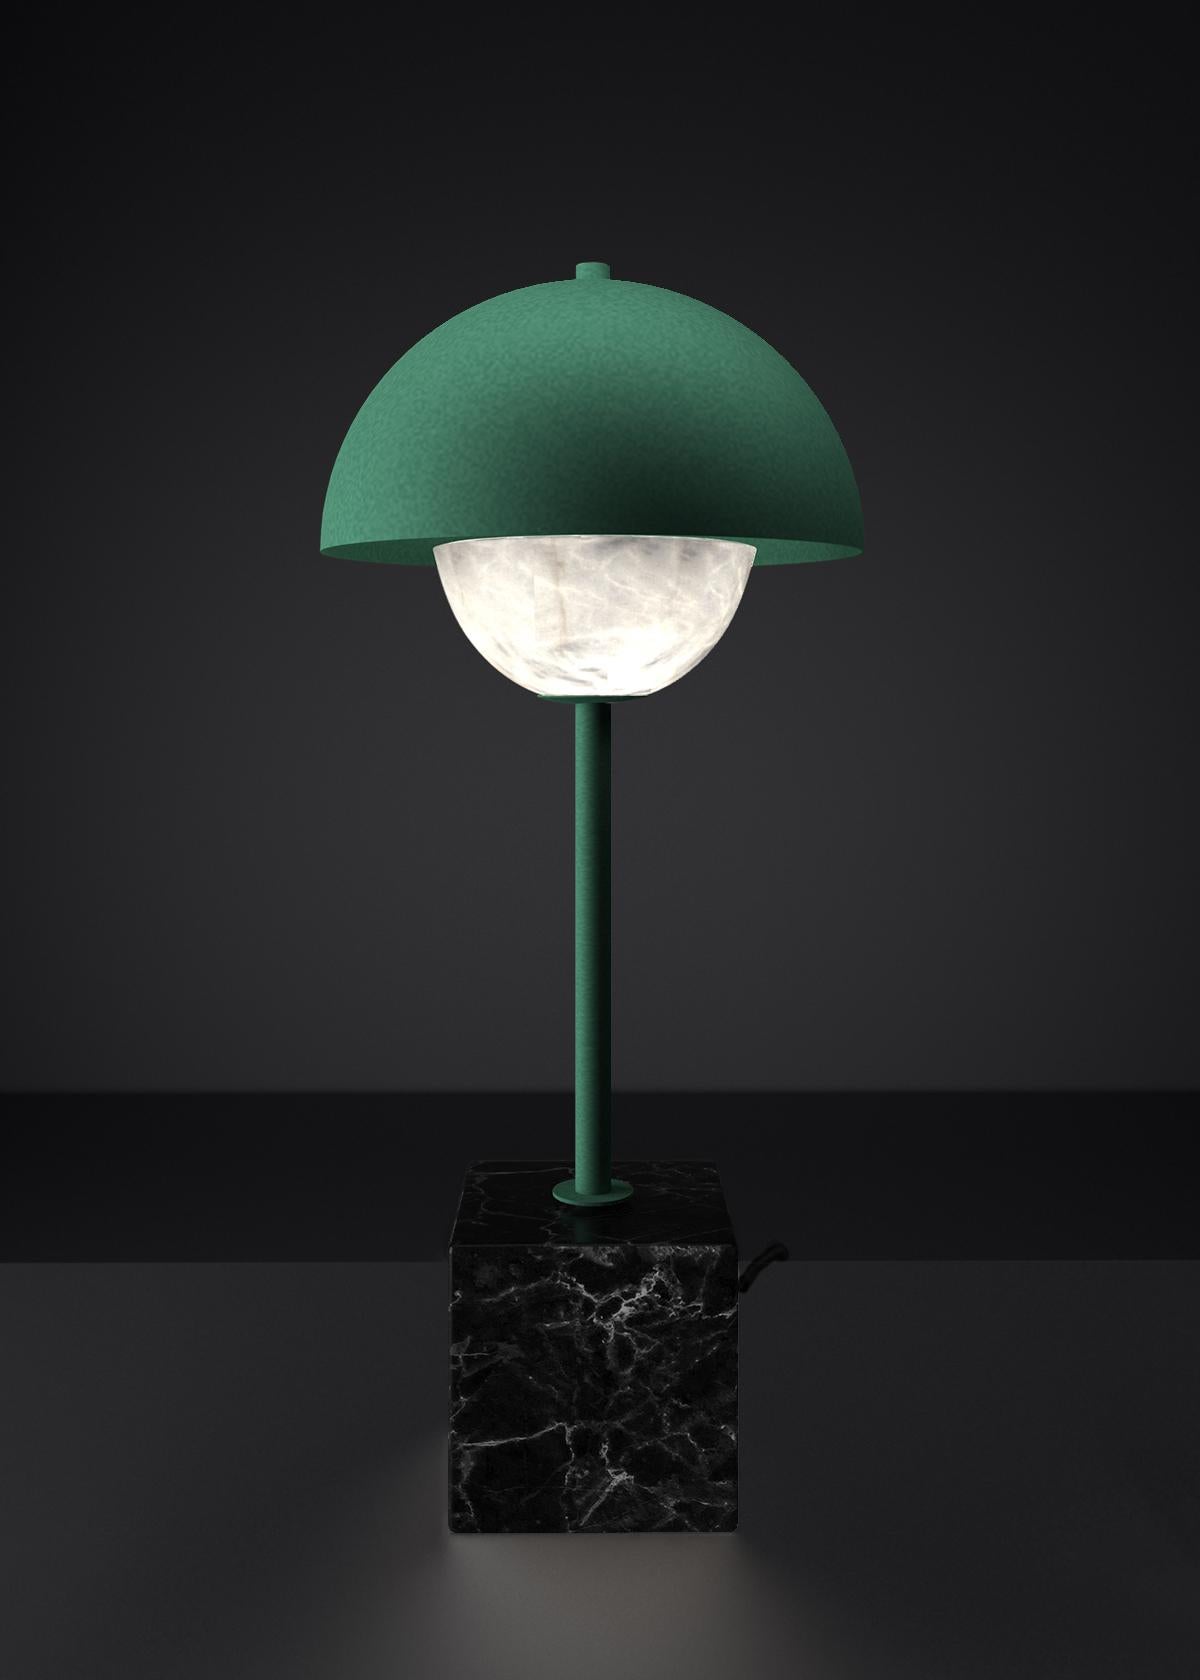 Apollo Freedom Green Metal Table Lamp by Alabastro Italiano
Dimensions: D 30 x W 30 x H 74 cm.
Materials: White alabaster, Nero Marquinia marble, black silk cables and metal.

Available in different finishes: Shiny Silver, Bronze, Brushed Brass,